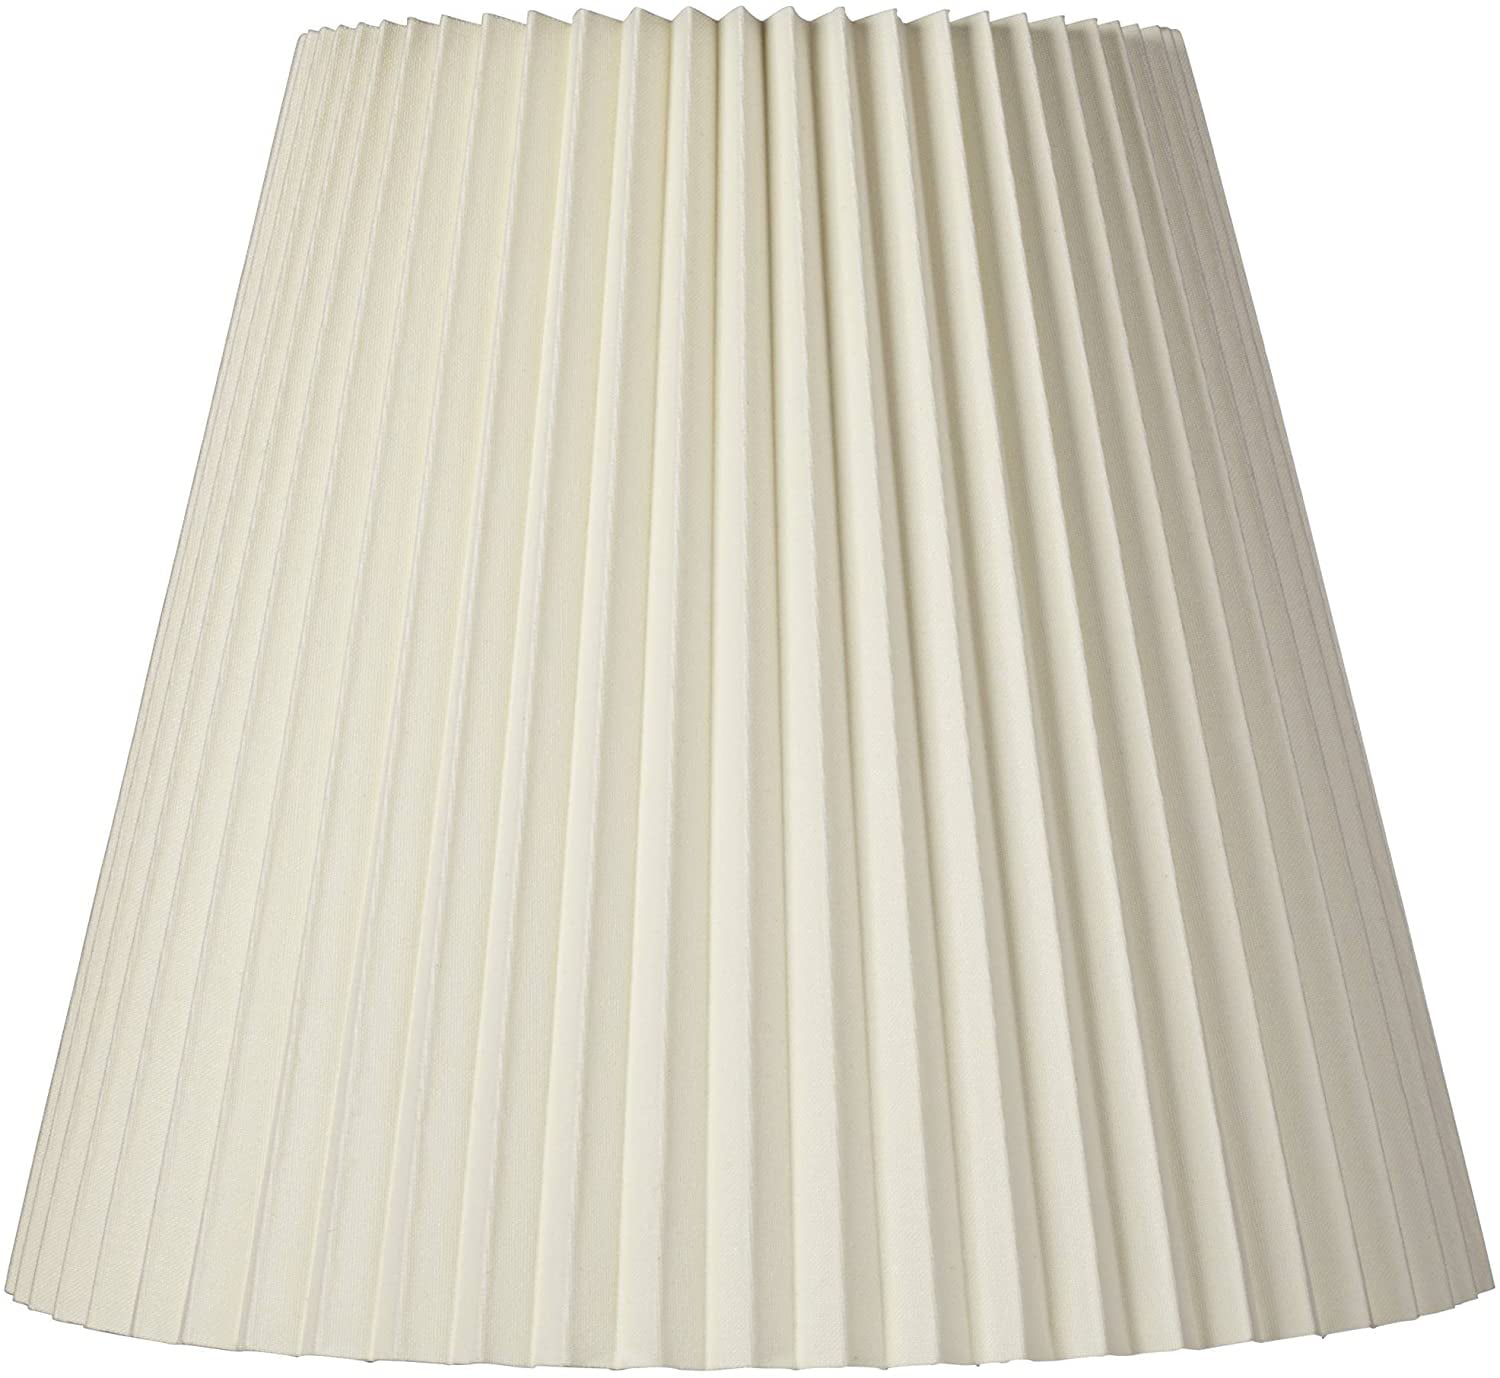 Spider Brentwood LUCY STORE Ivory Pleated Lamp Shade Traditional Unlined with Harp 10x17x14.75 